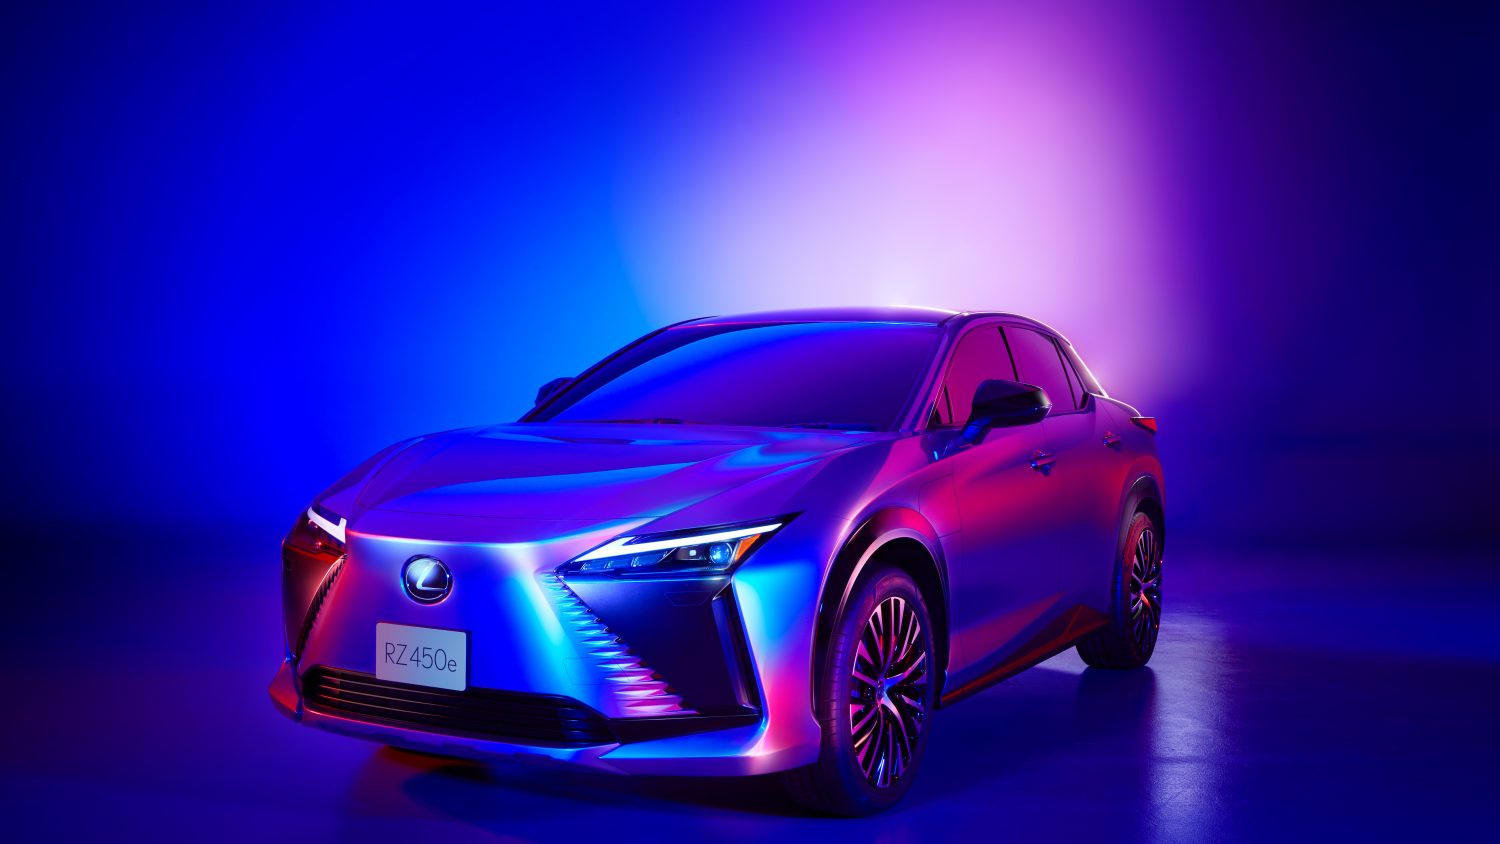 The Lexus RZ 450e is a new EV crossover expected to arrive some time in 2022.